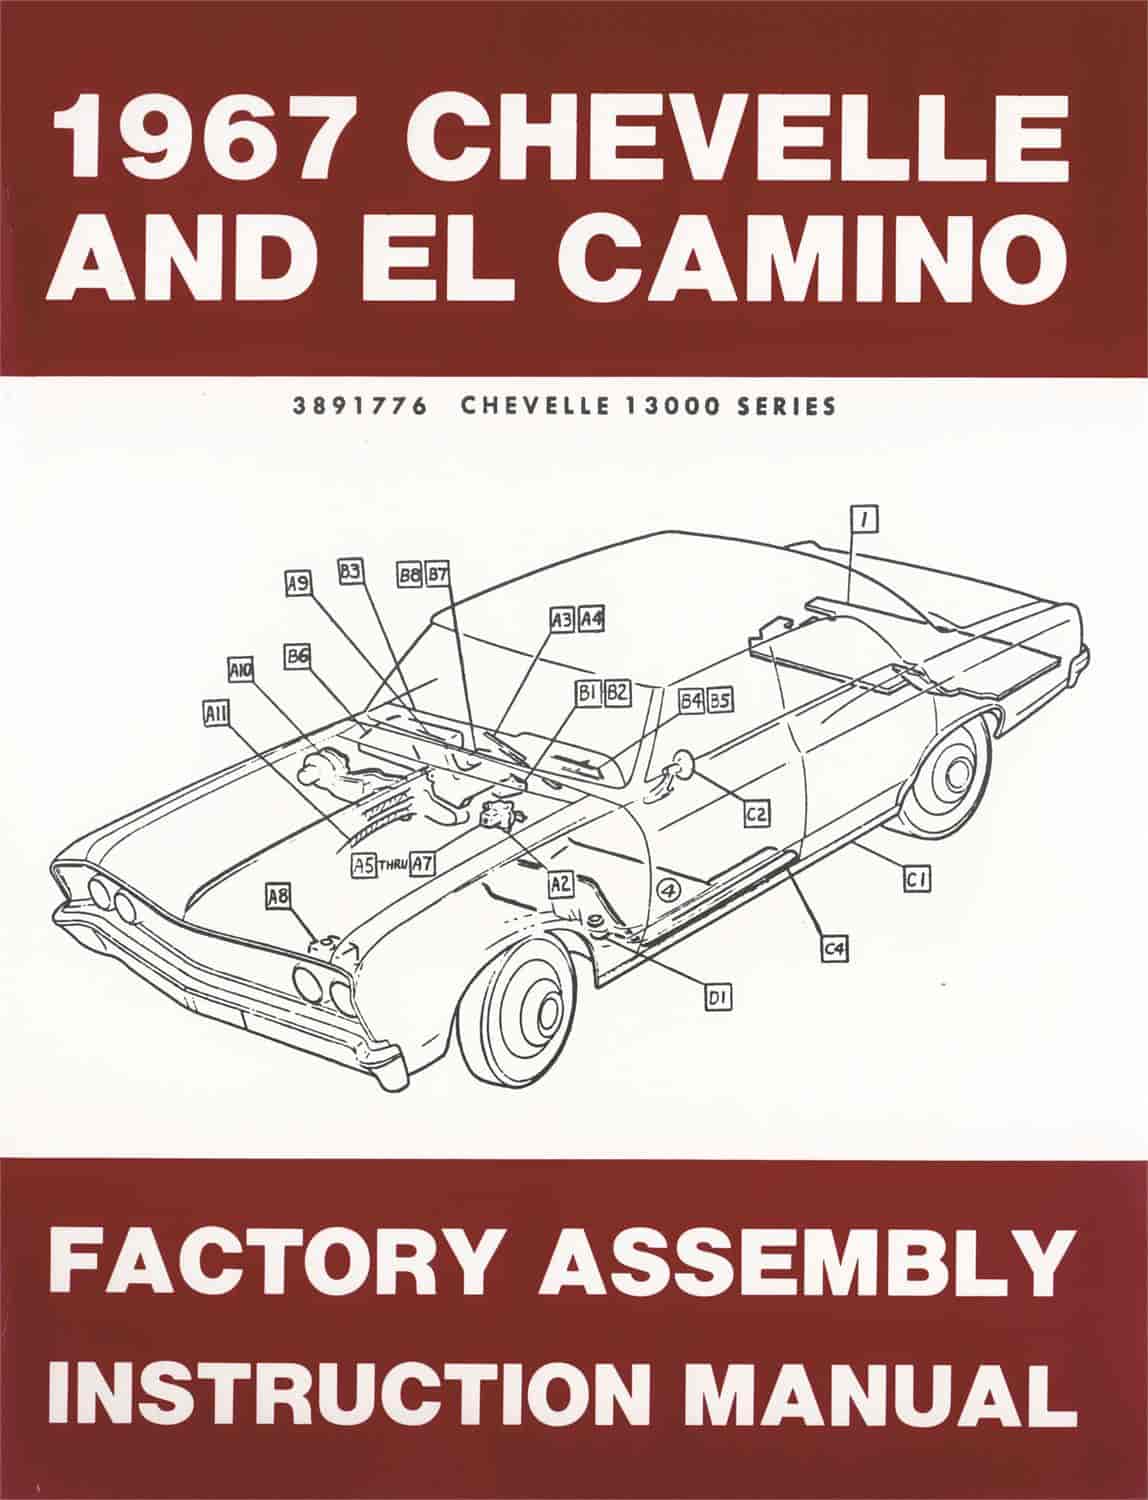 Factory Assembly Manual 1967 Chevy Chevelle & El